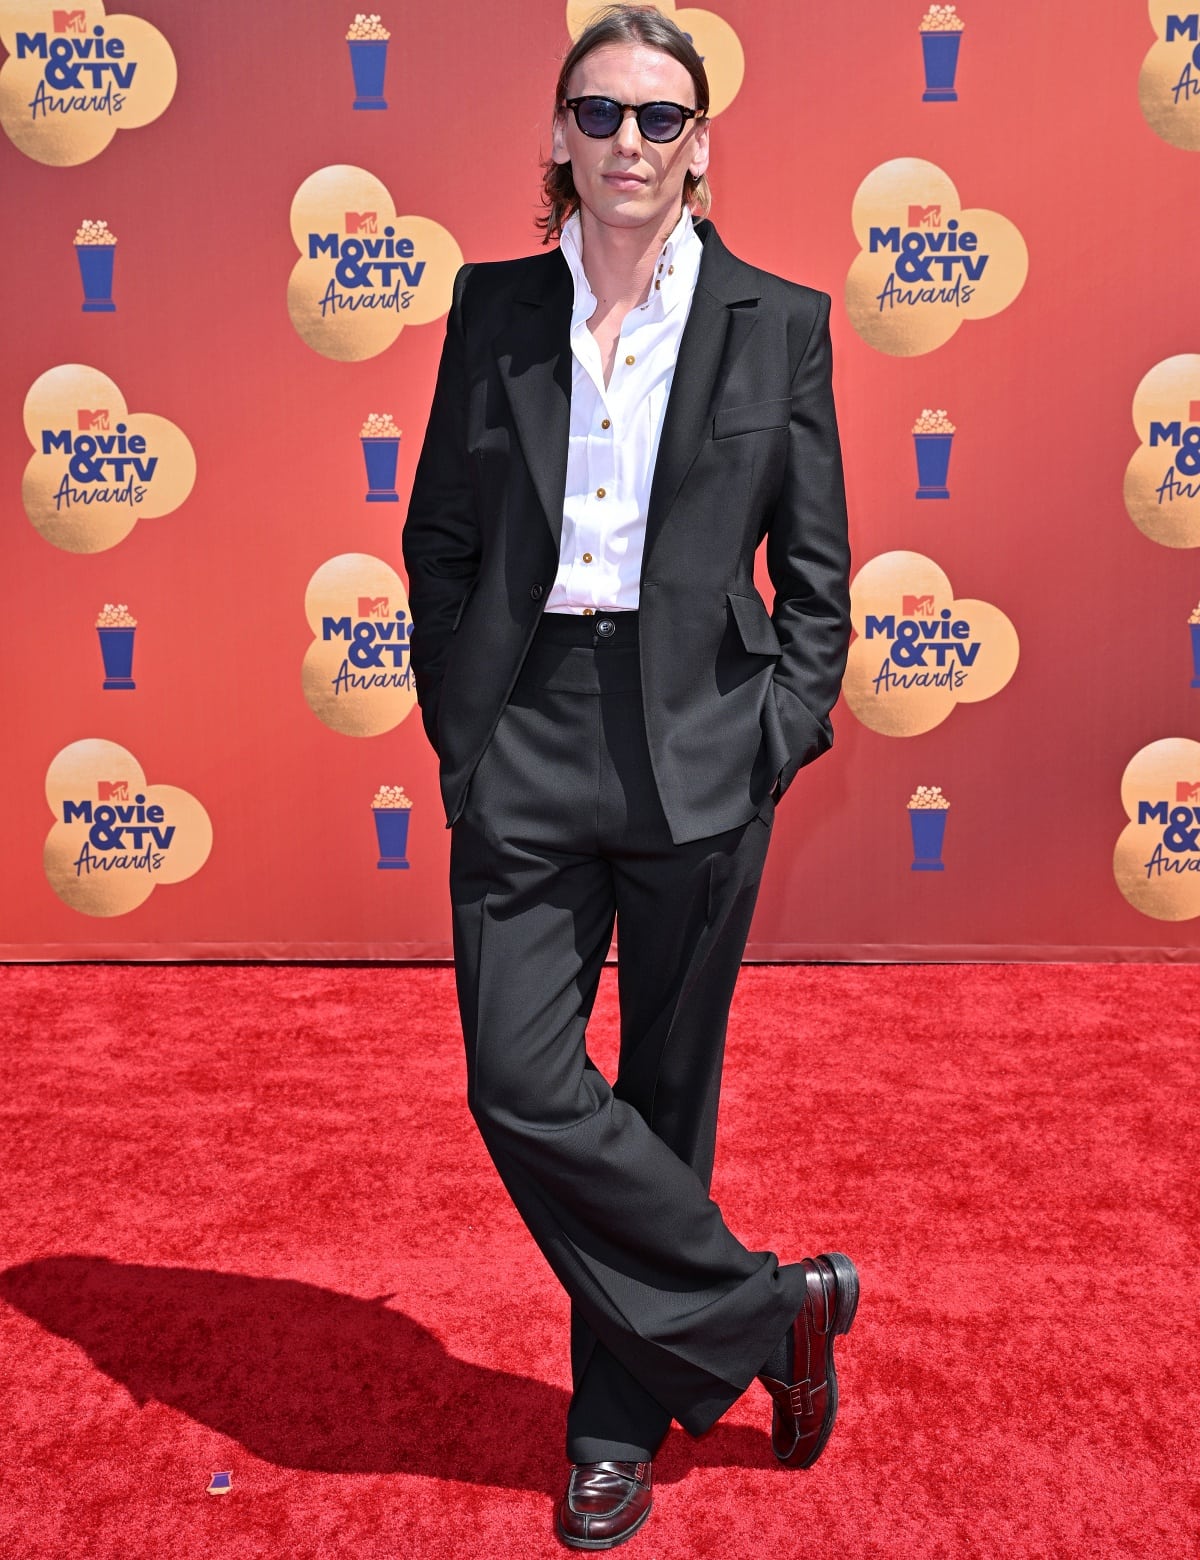 Jamie Campbell Bower exuding cool nonchalance in a suit and shades at the 2022 MTV Movie and TV Awards